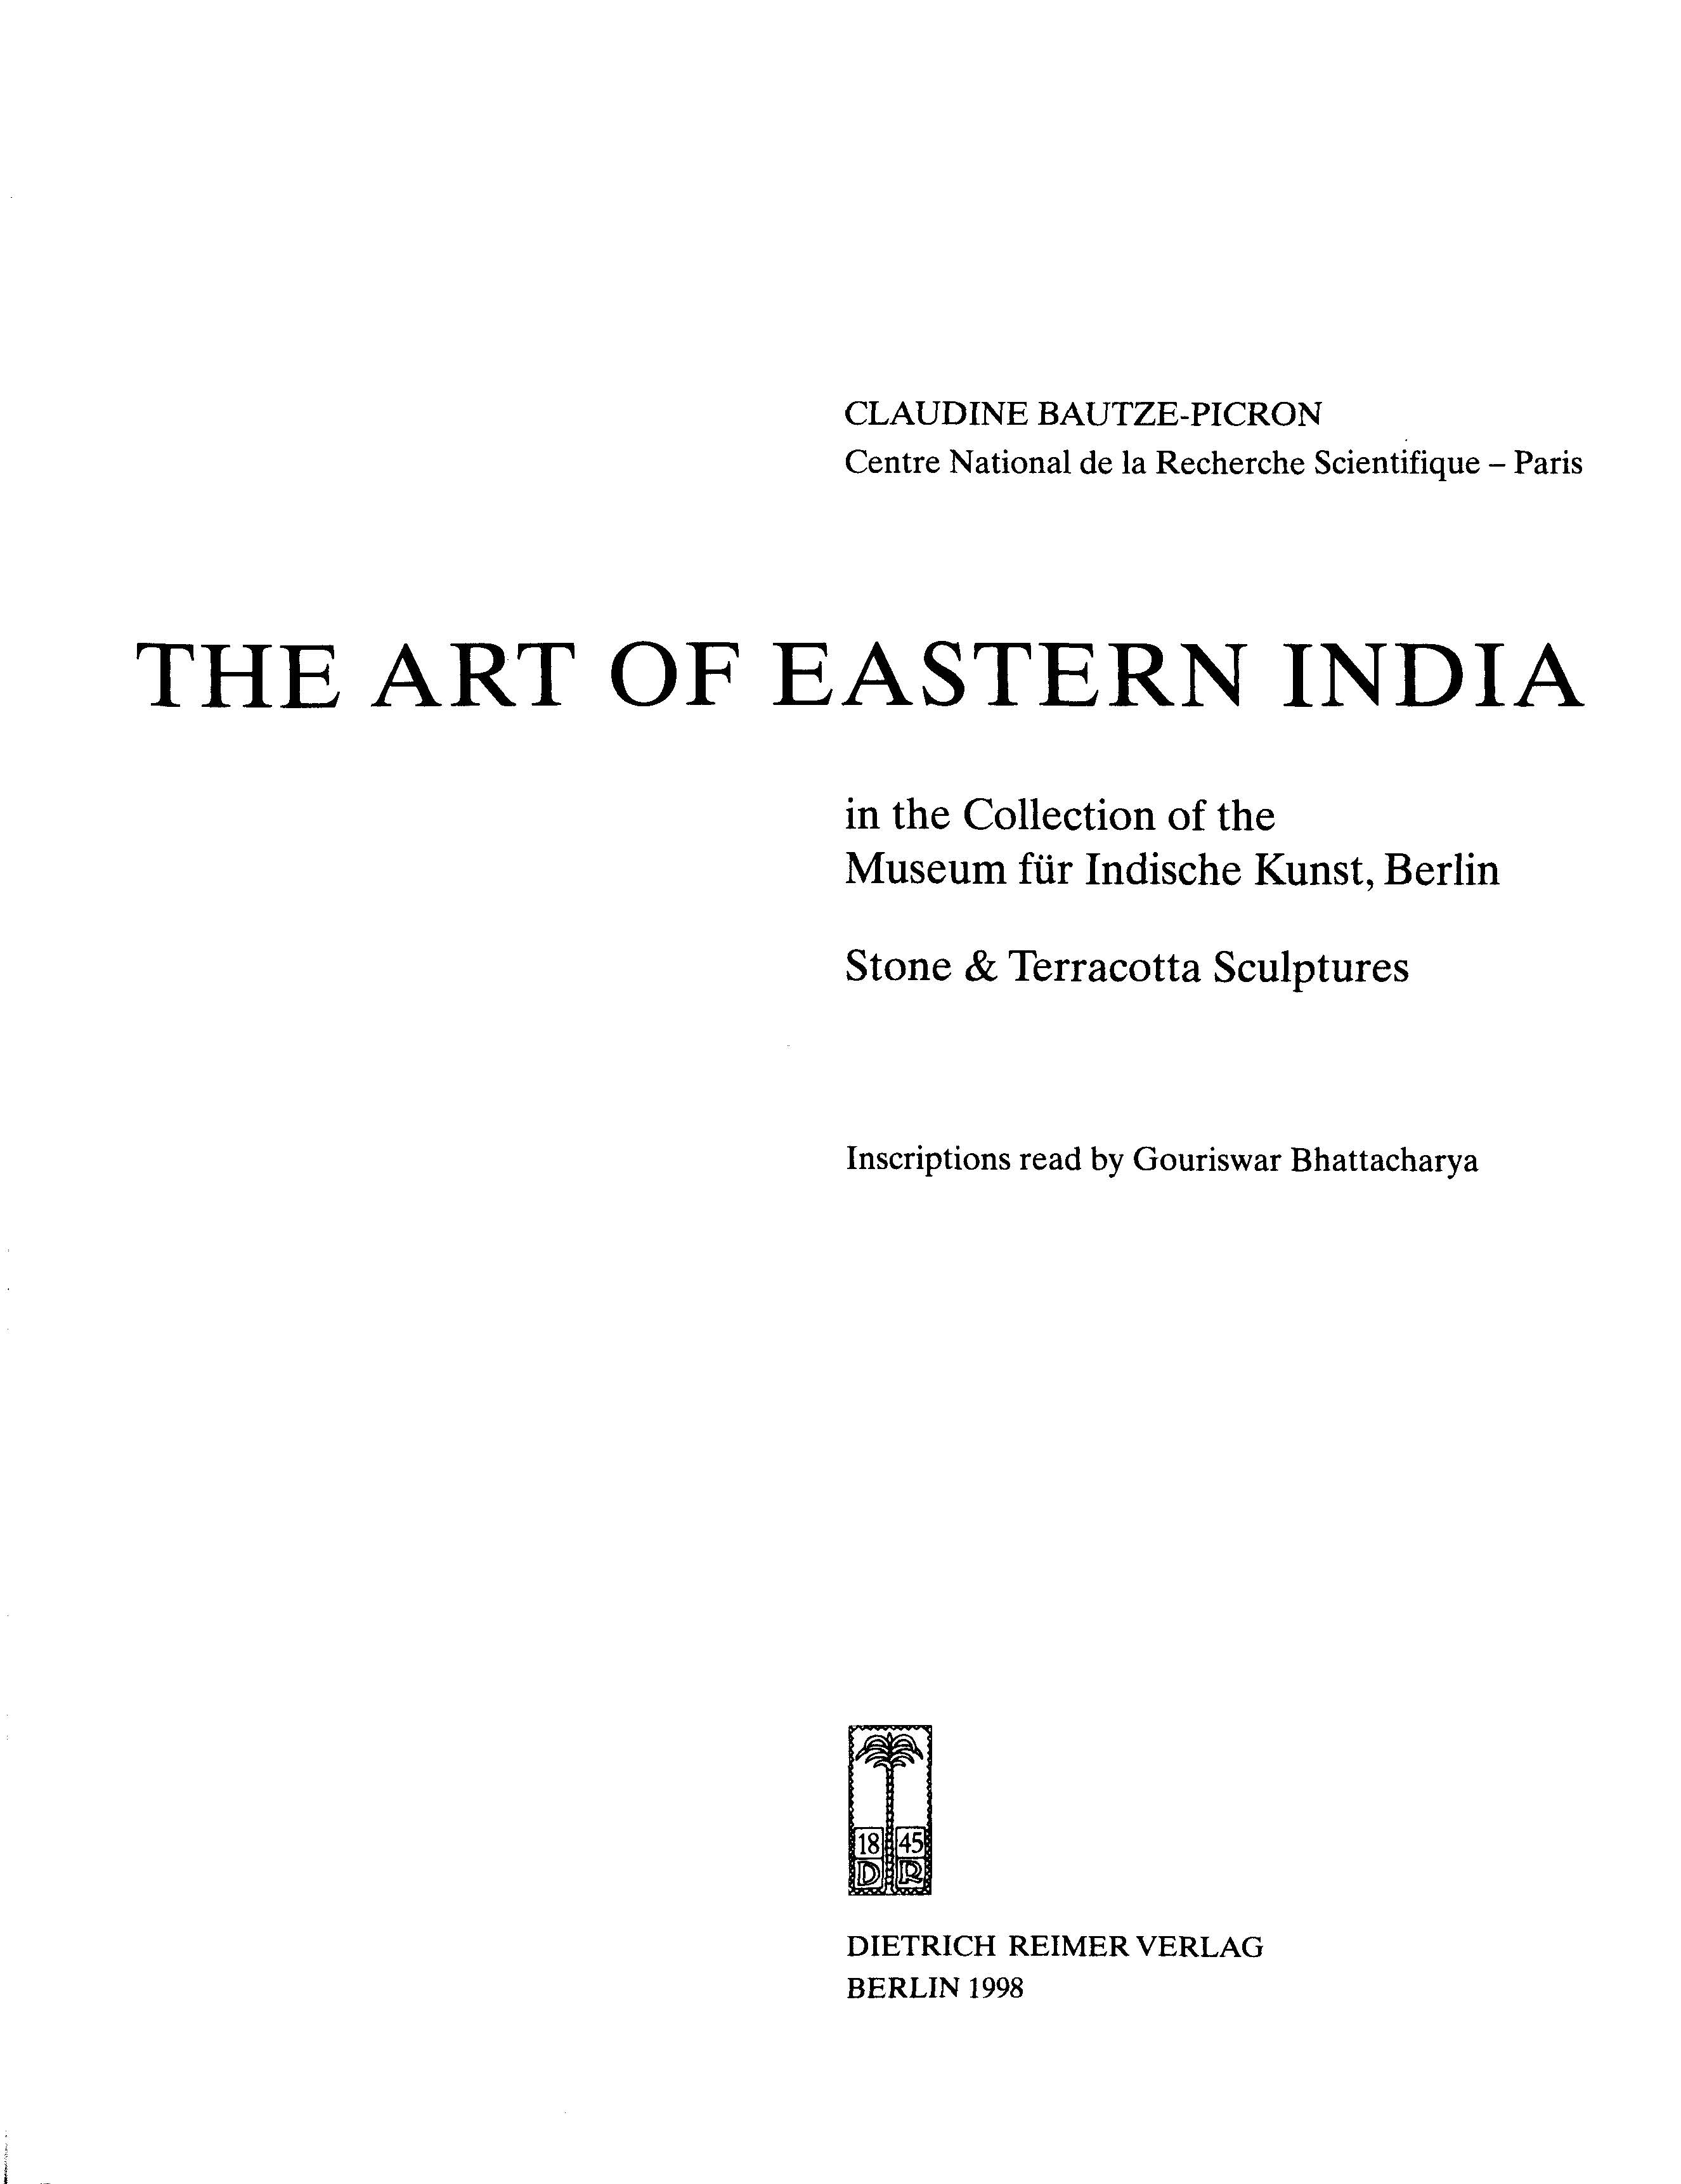 Cover: The Art of Eastern India in the Collection of the Museum für indische Kunst, Berlin